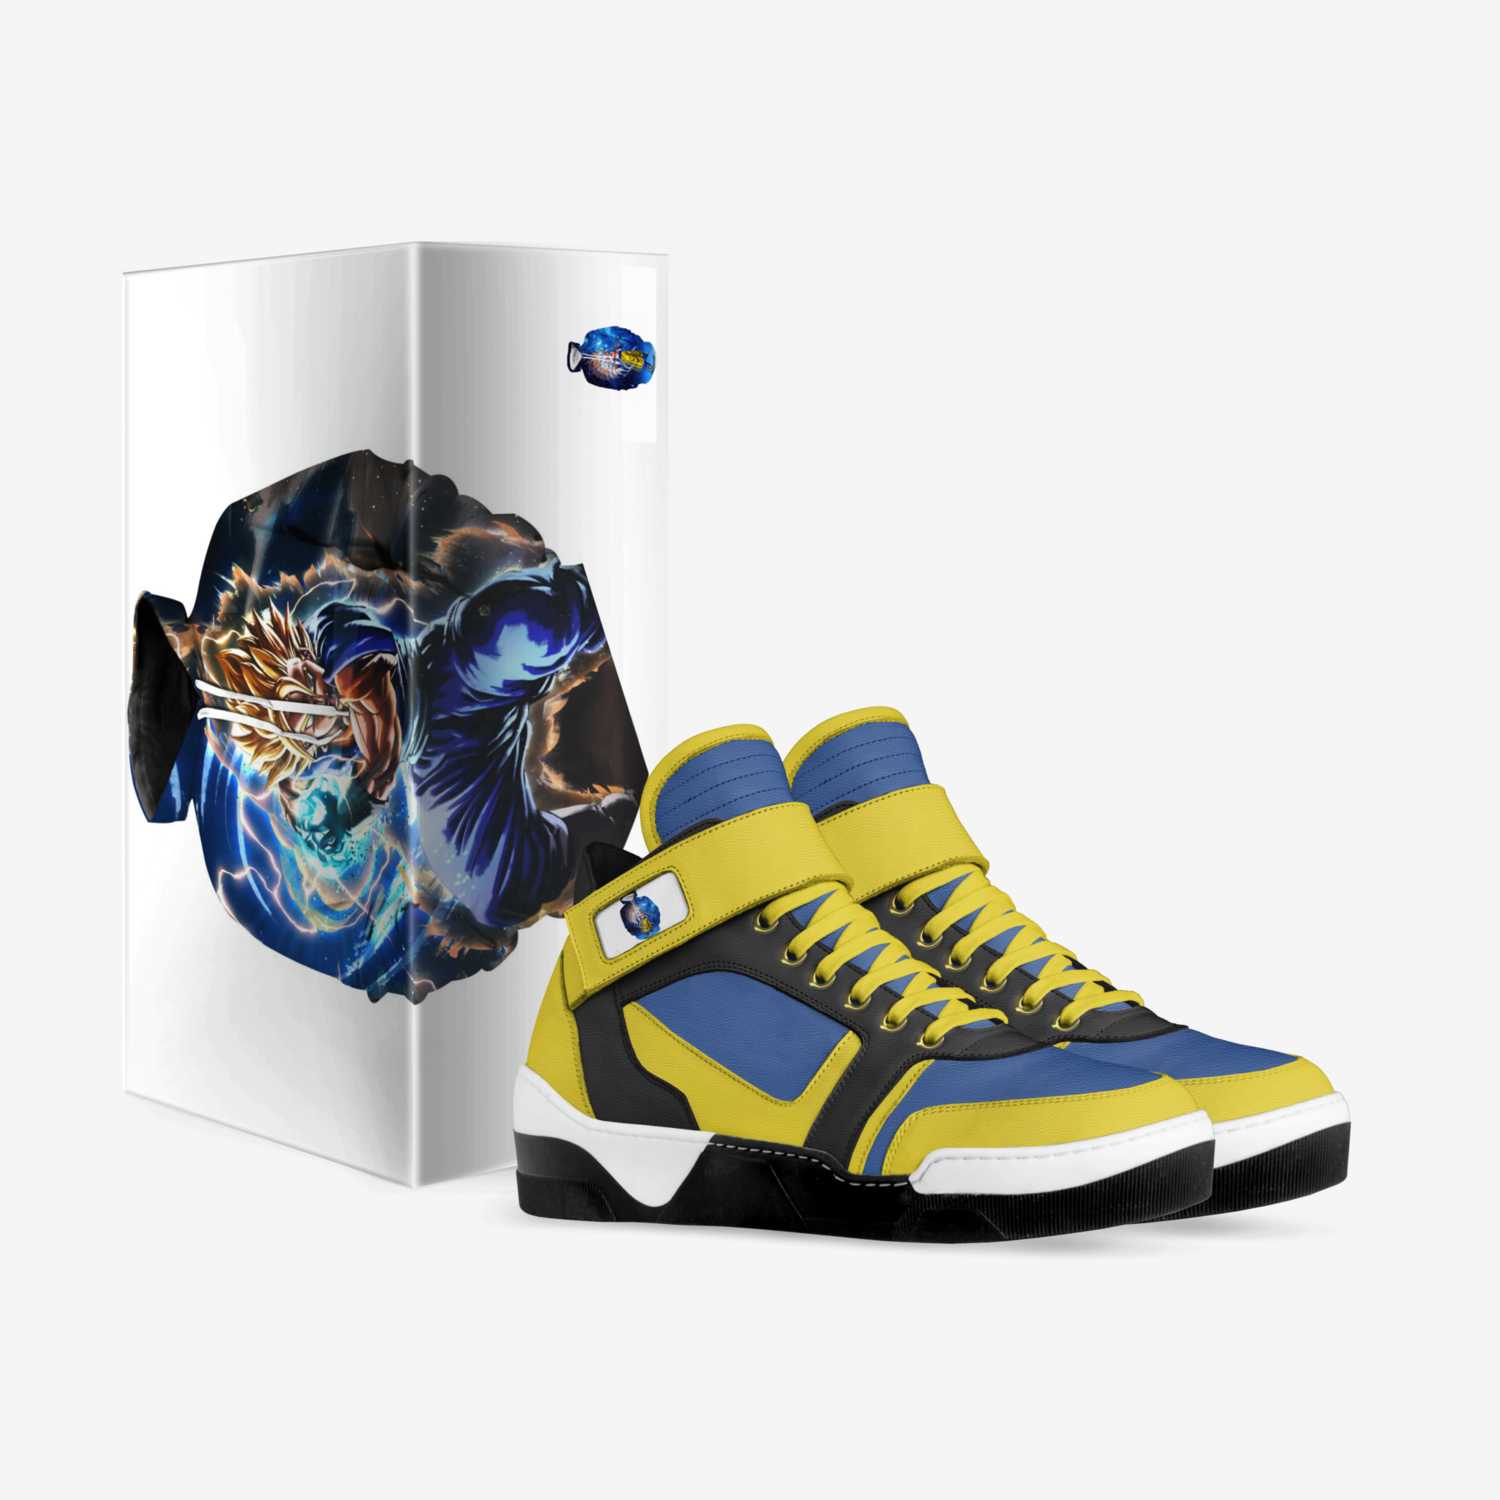 the saiyans custom made in Italy shoes by Franktai | Box view